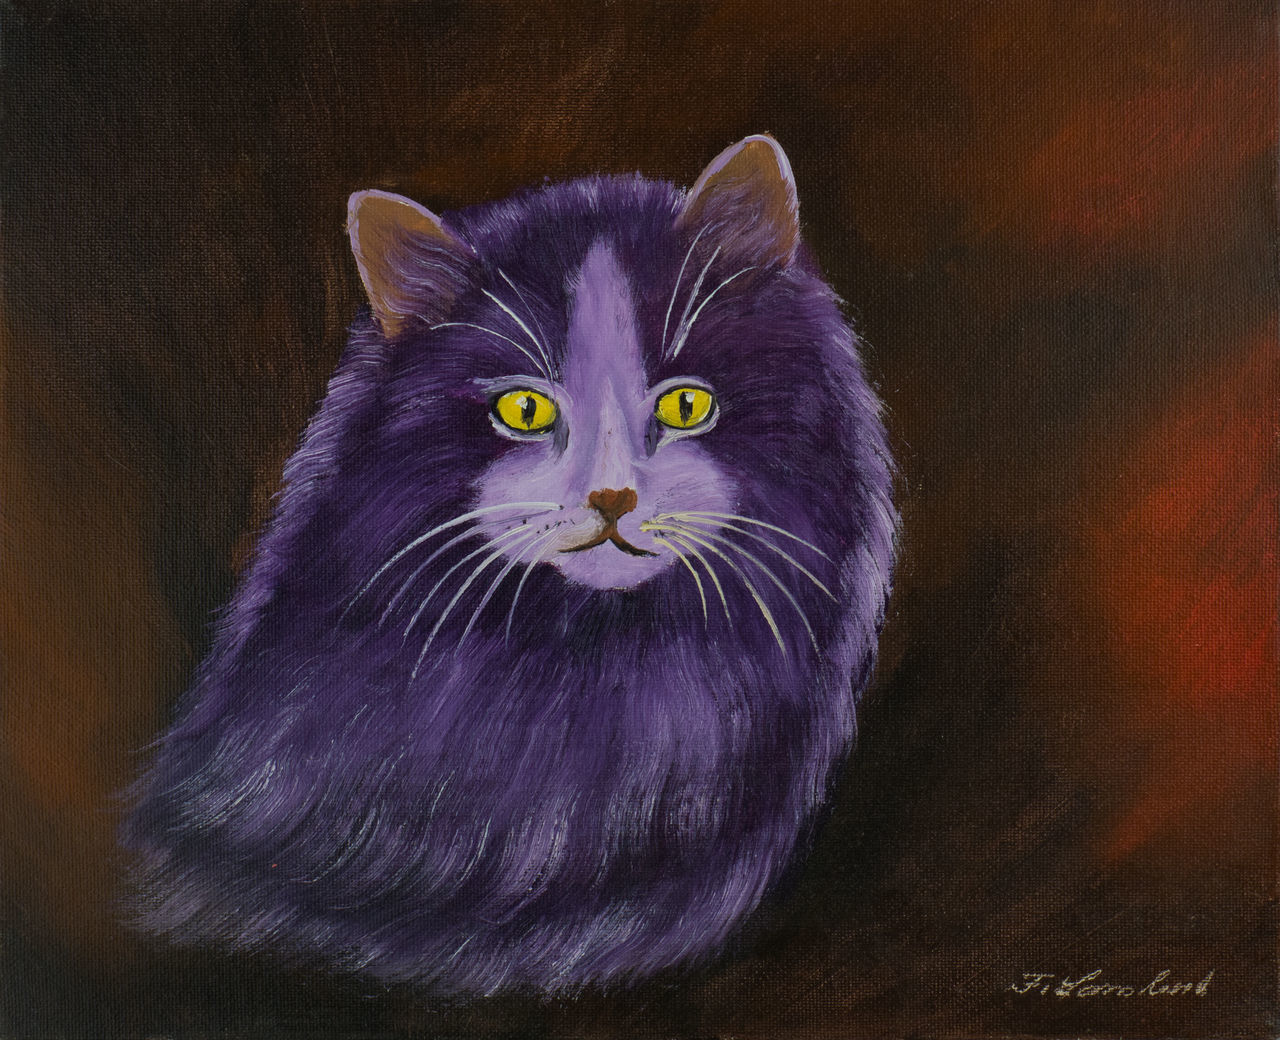 CLOSE-UP PORTRAIT OF A CAT ON PURPLE INDOORS